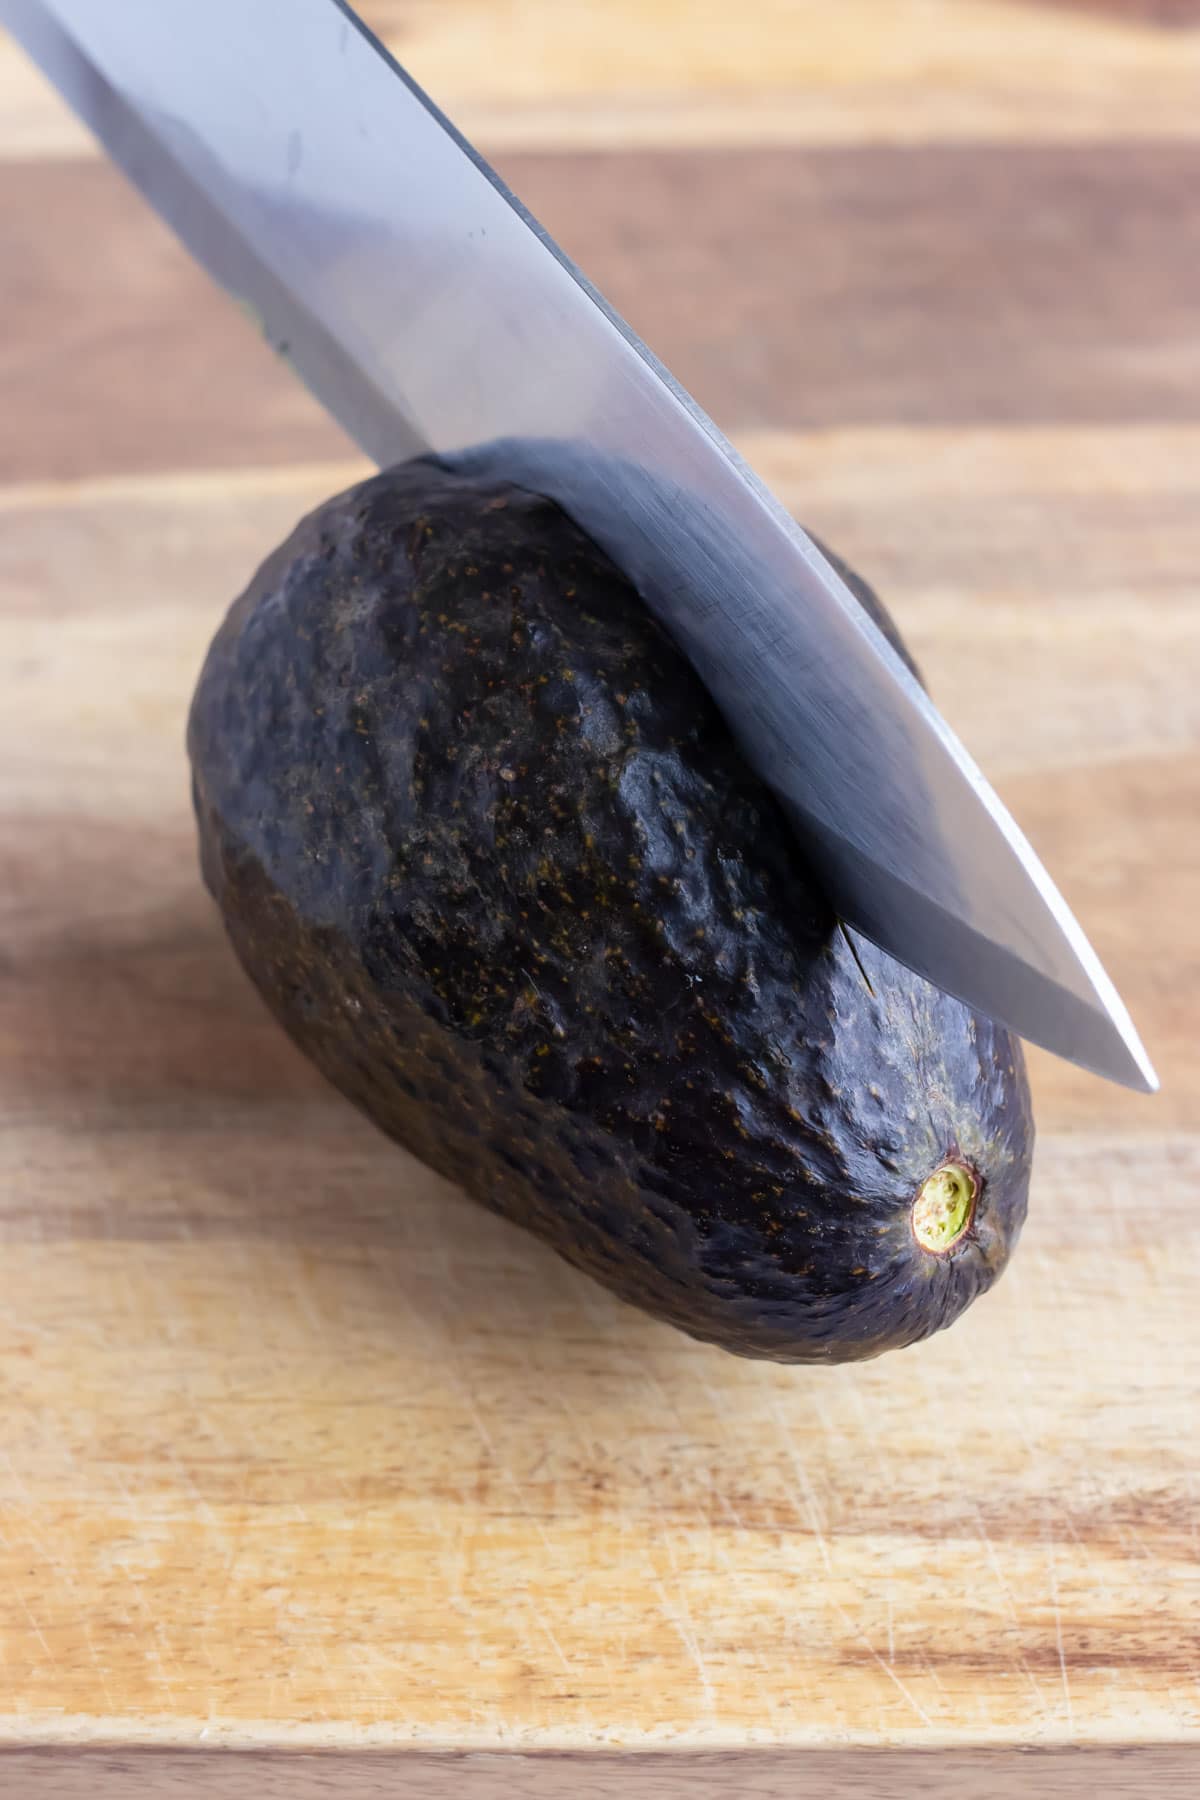 How to Cut an Avocado  There's an Easier & Better Way!